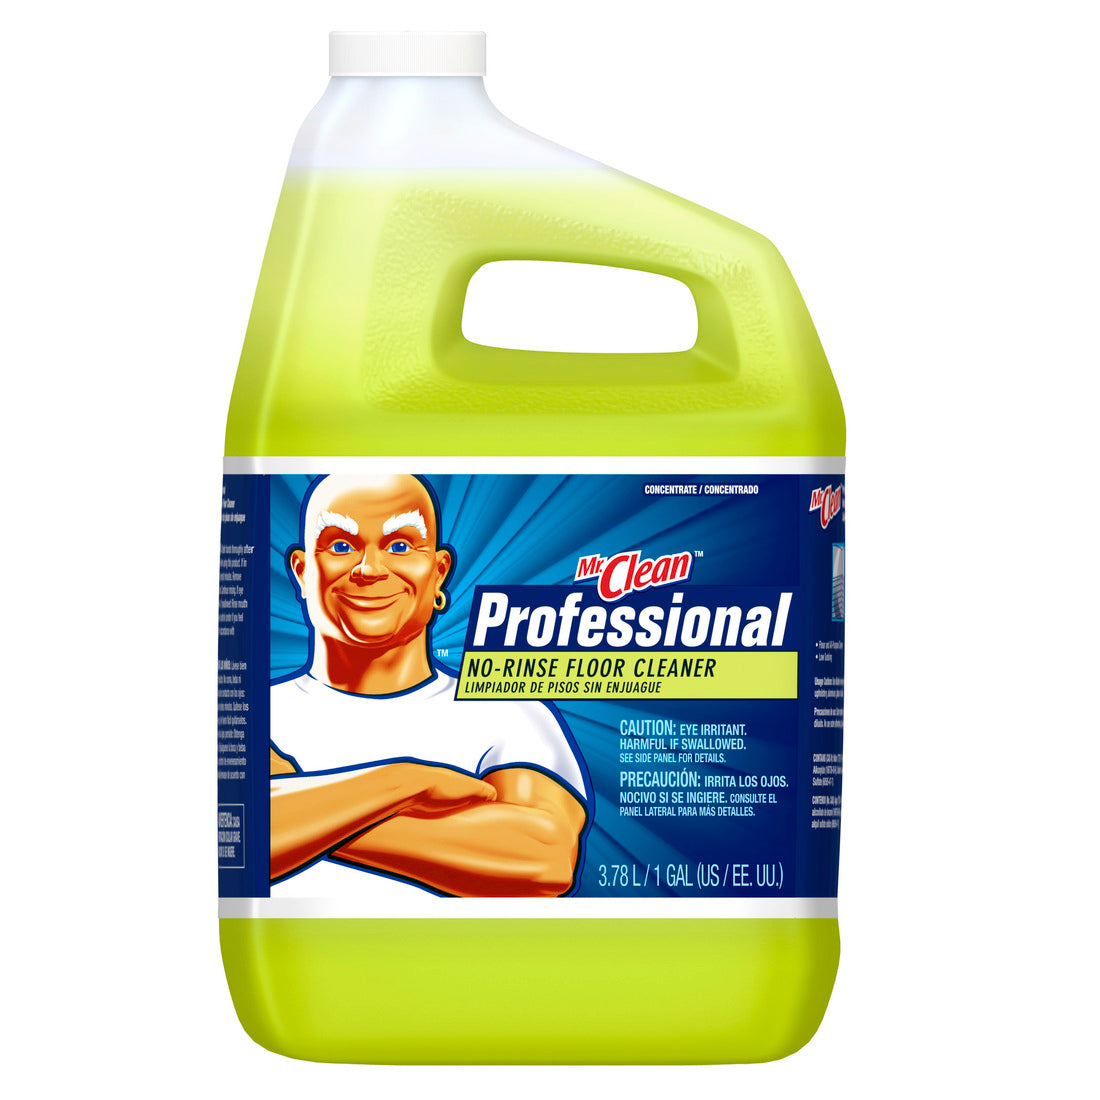 Mr. Clean Professional No-Rinse Floor Cleaner-128oz/4pk